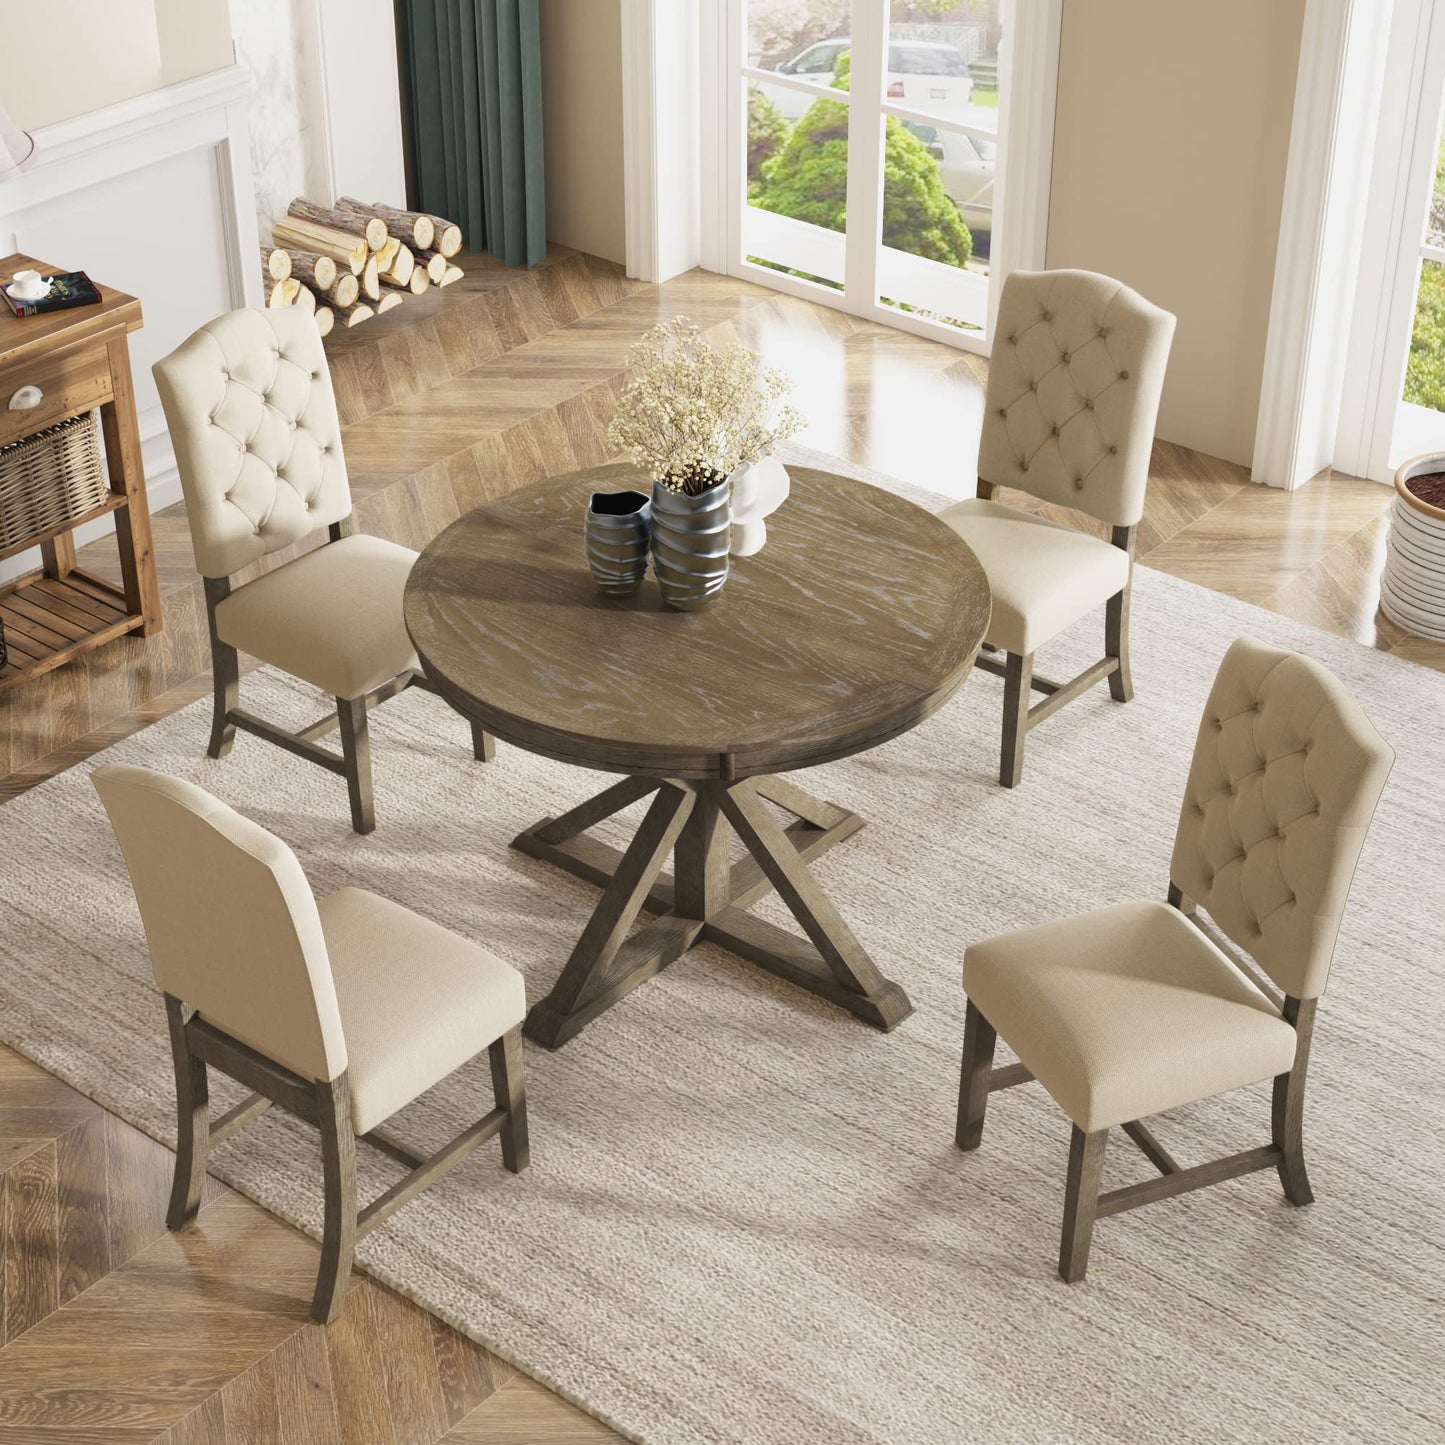 P PURLOVE Retro Style 5-Piece Round Dining Table Set for 4, Extendable Table with 4 Upholstered Chairs for Dining Room,Living Room